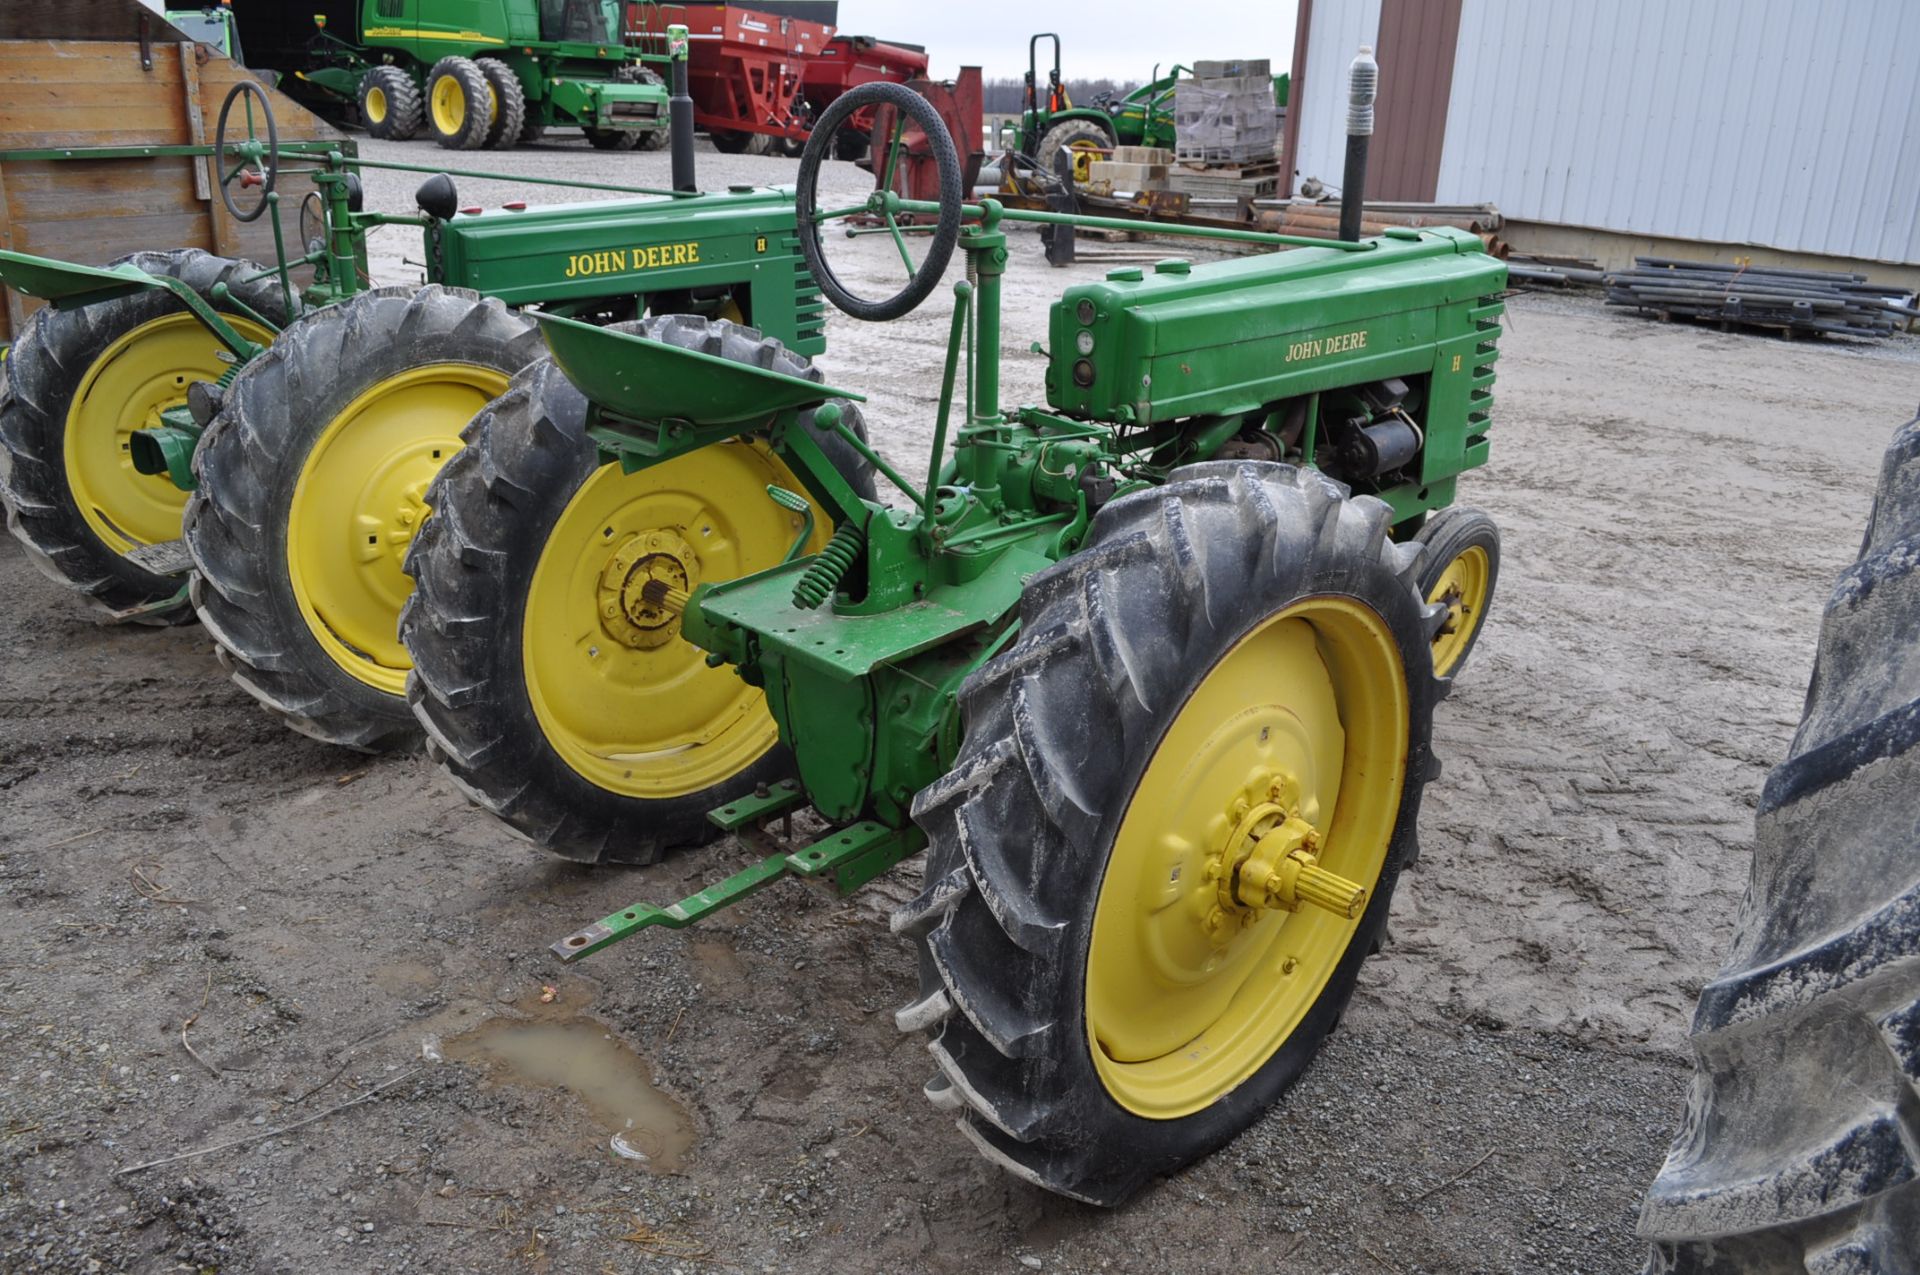 John Deere H tractor, gas, 9.5-32 rear tires, 4.00-15 front tires, narrow front, electric start - Image 3 of 12